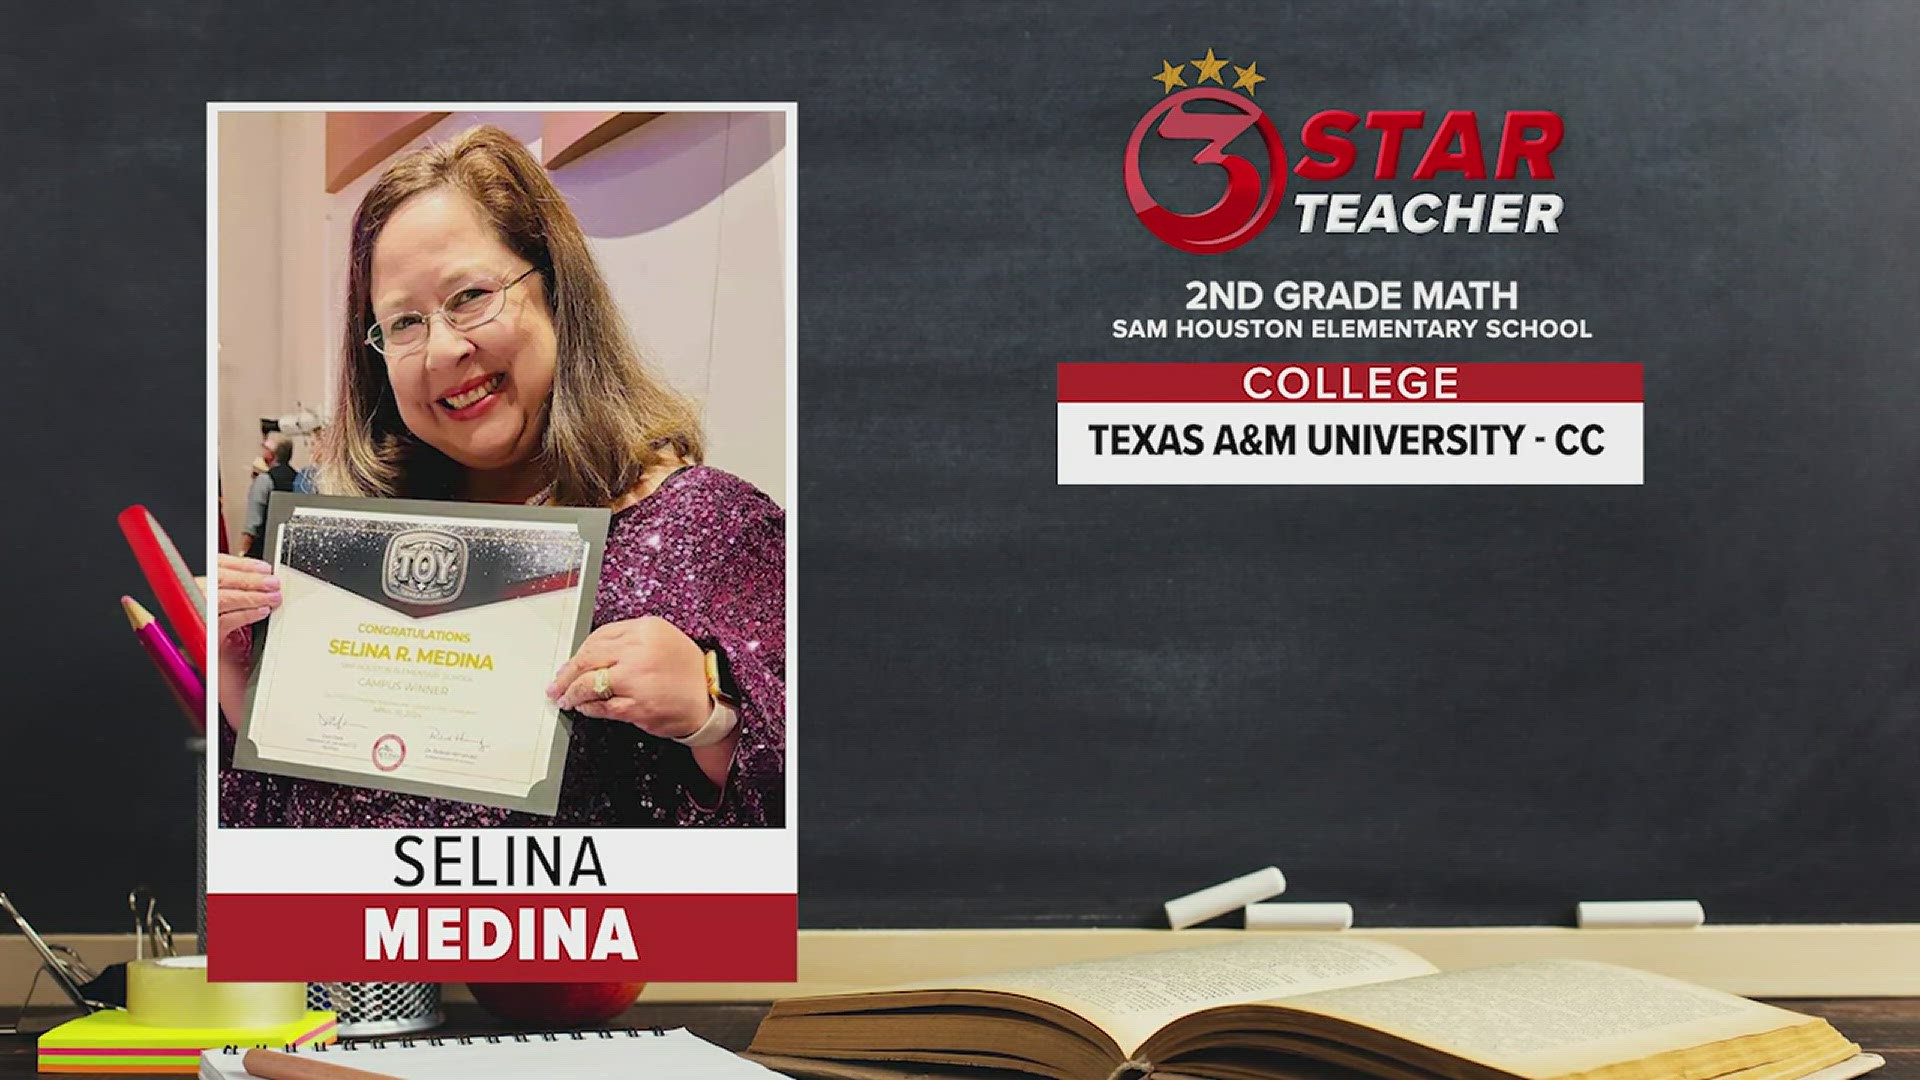 Selina Medina has been a teacher for 24 years and counting! Her peers say she is a pure joy to work with.